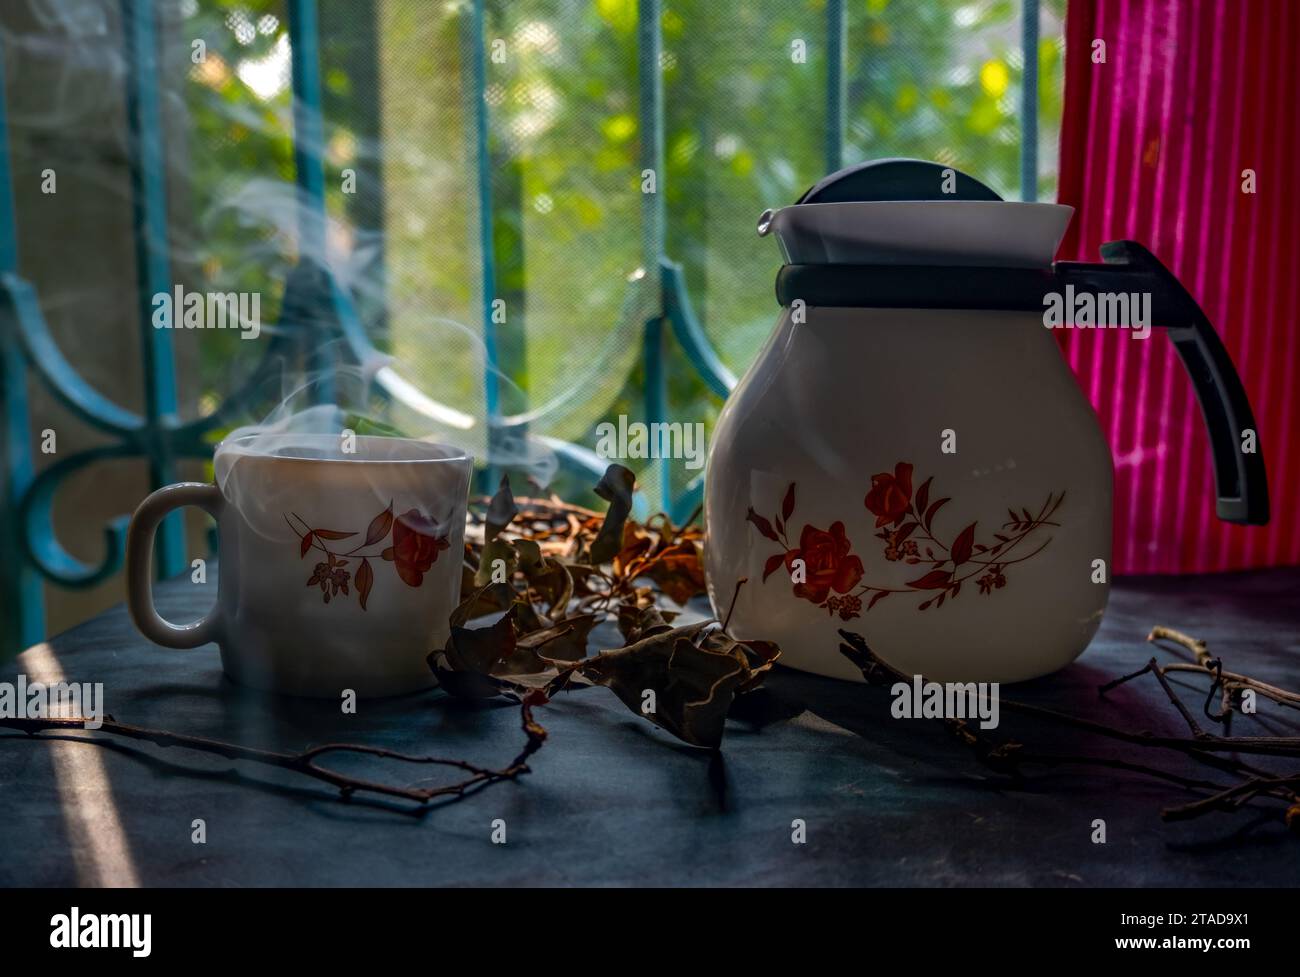 Natural light falls on the table from outside the window. Stock Photo